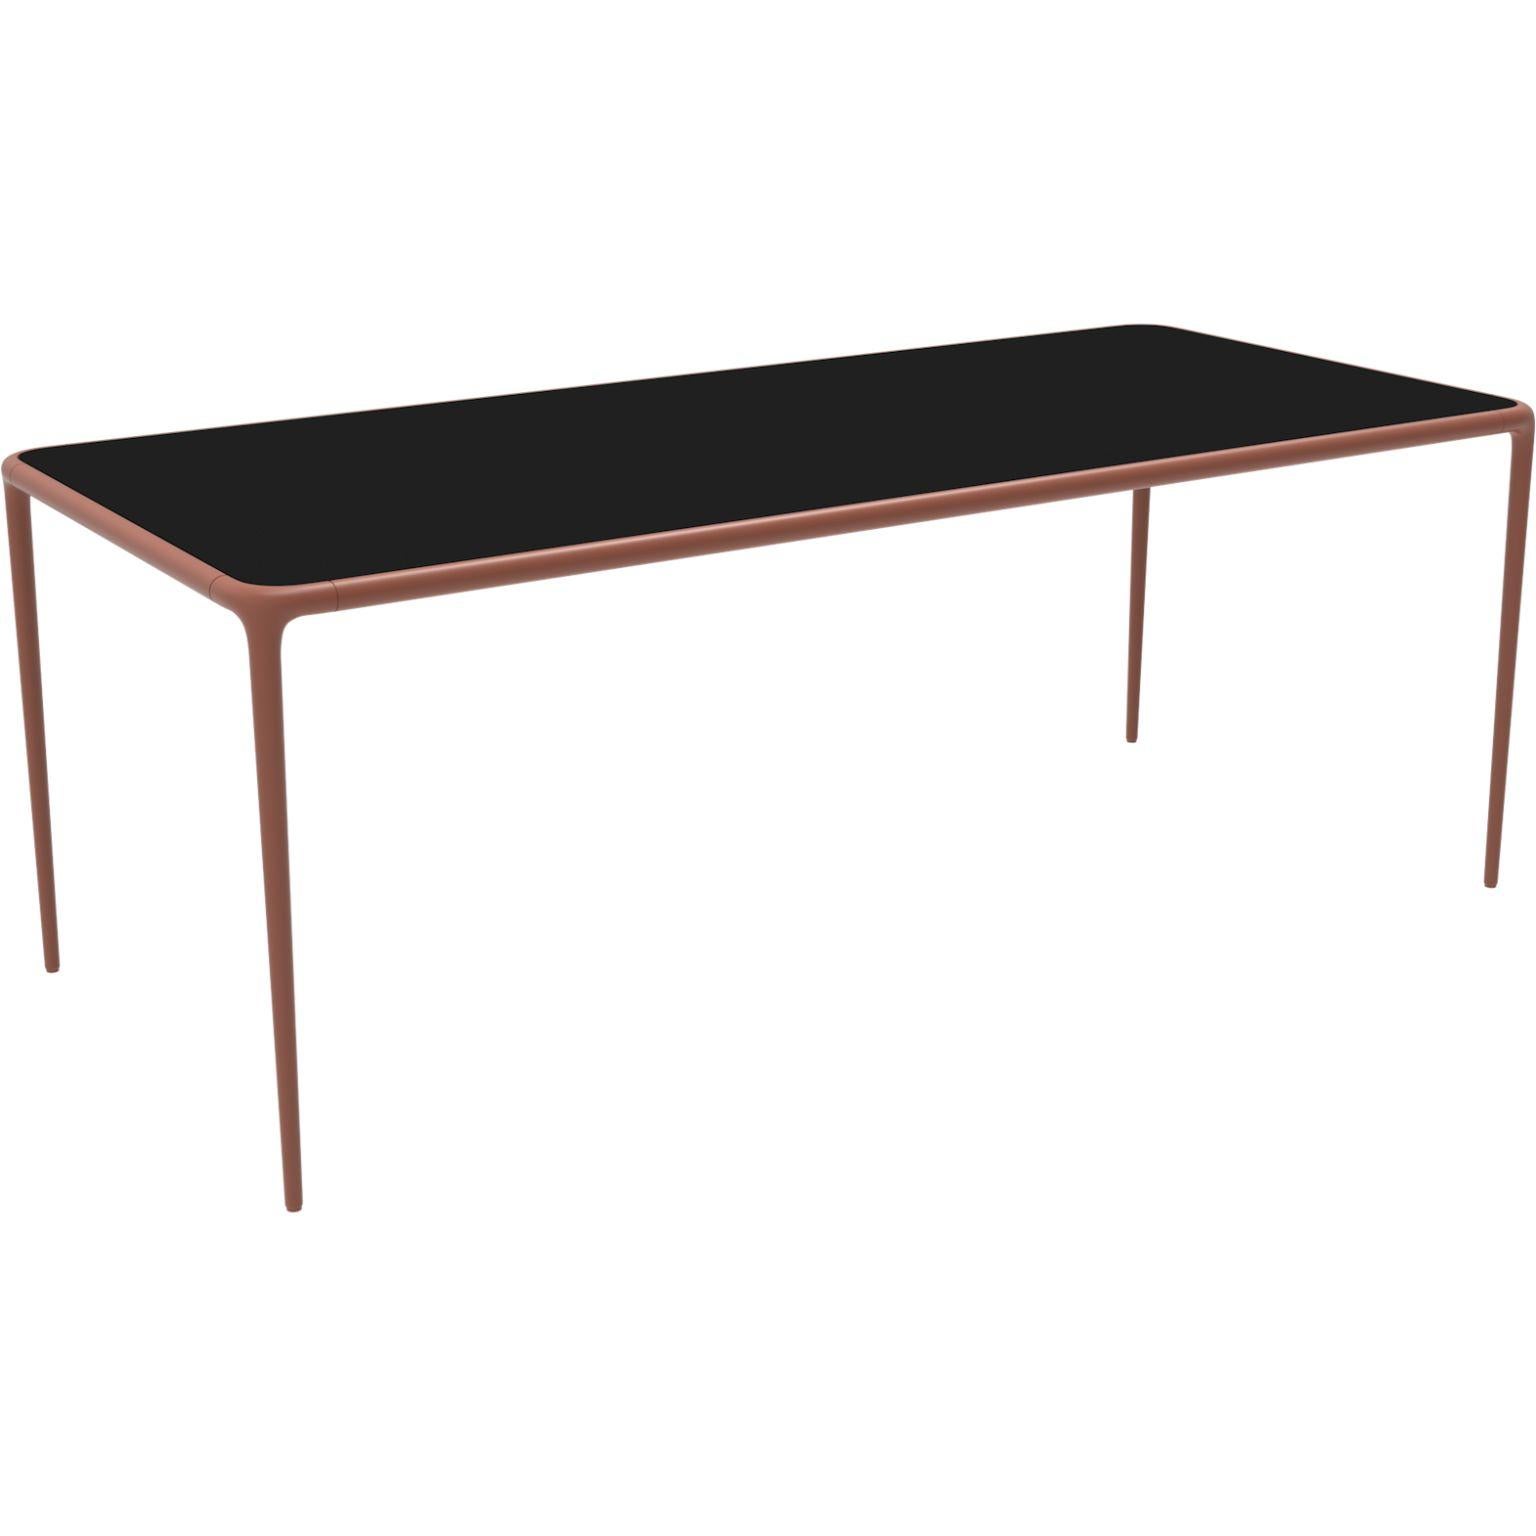 Xaloc salmon glass top 200 table by MOWEE
Dimensions: D200 x W90 x H74 cm
Material: Aluminium, tinted tempered glass top.
Also available in different aluminum colors and finishes (HPL Black Edge or Neolith). 

Xaloc synthesizes the lines of